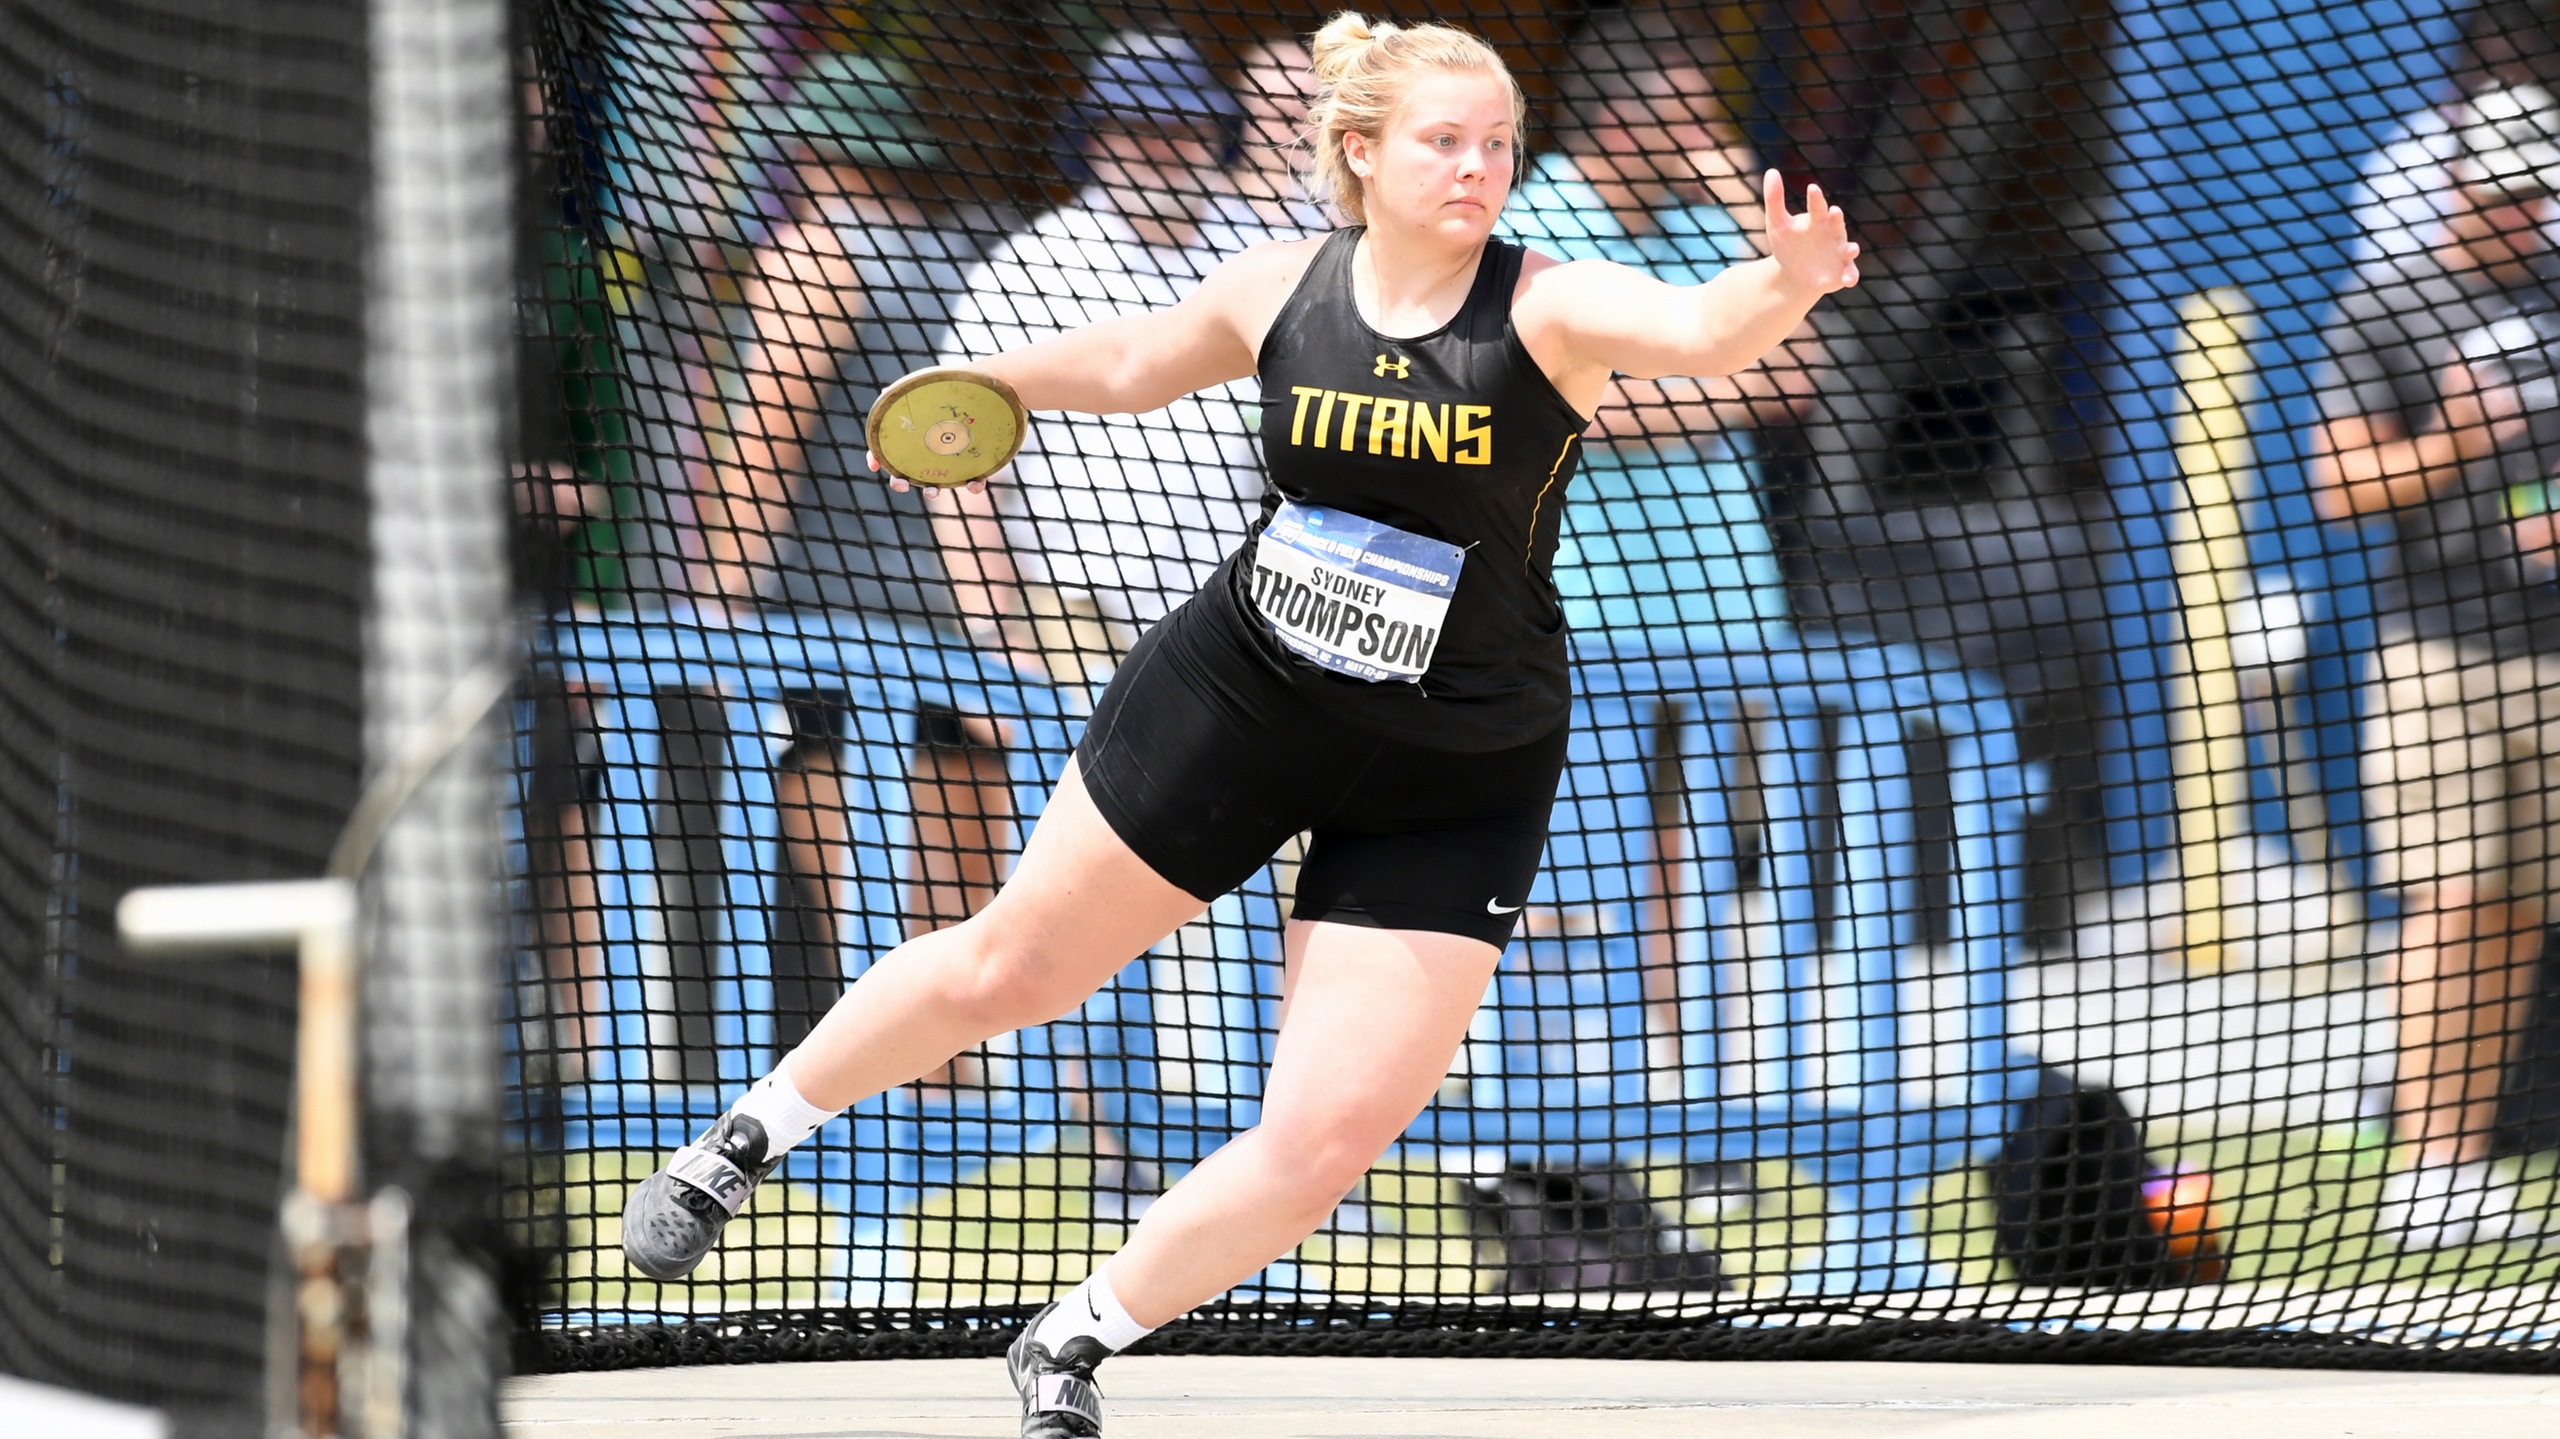 Sydney Thompson won the 49th and 50th individual national outdoor titles in program history with her victories in the discus and shot put.